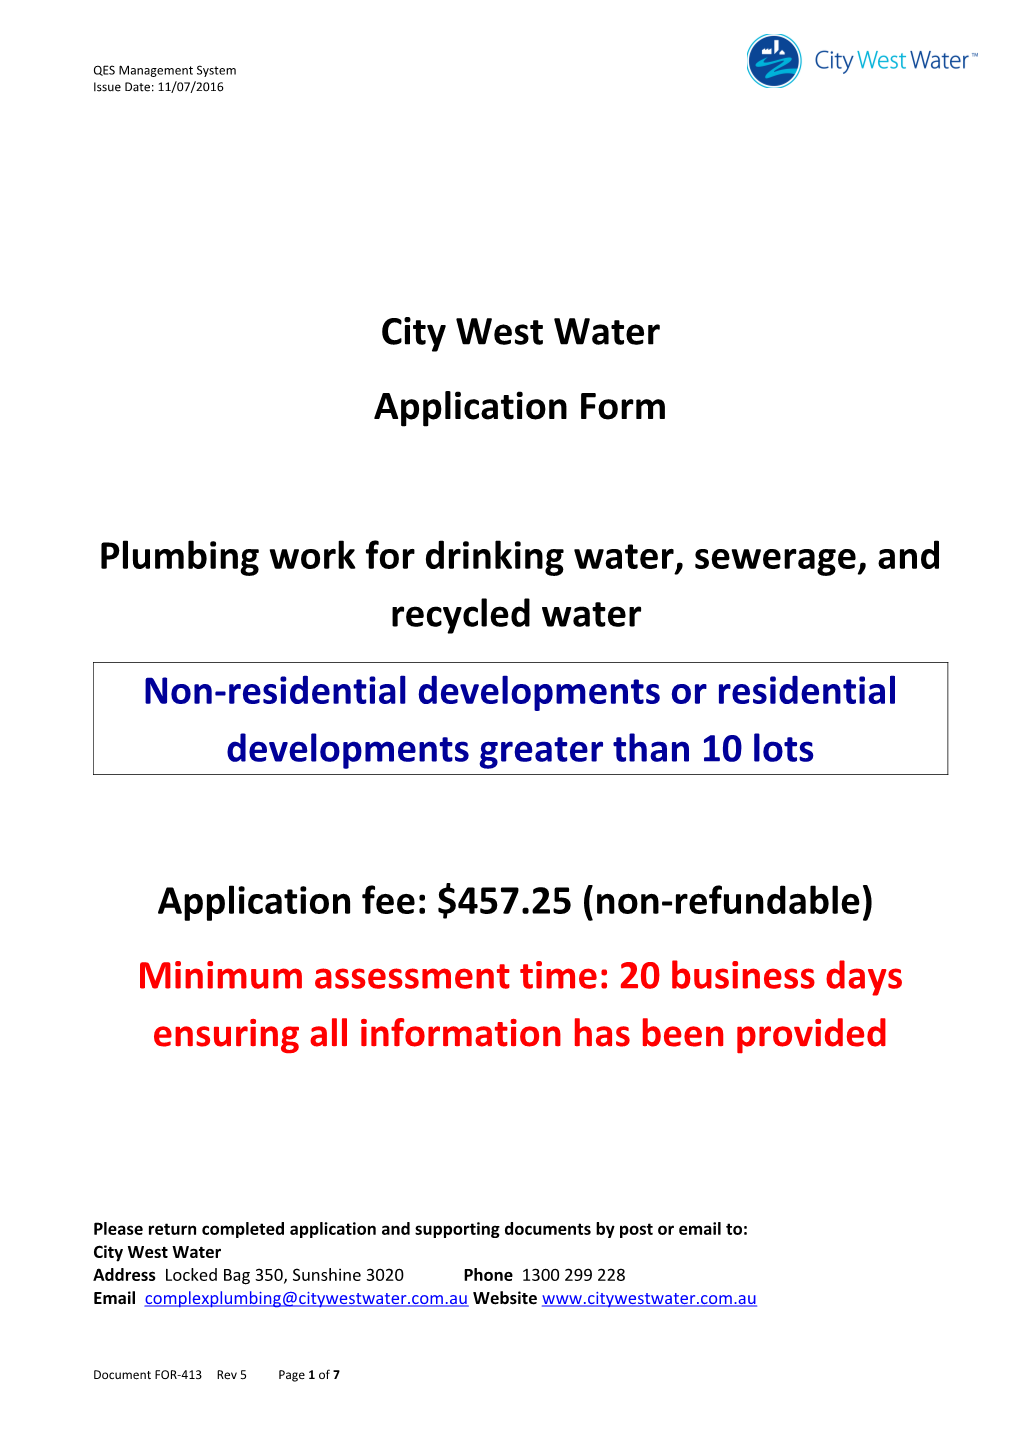 Plumbing Work for Drinking Water, Sewerage, and Recycled Water